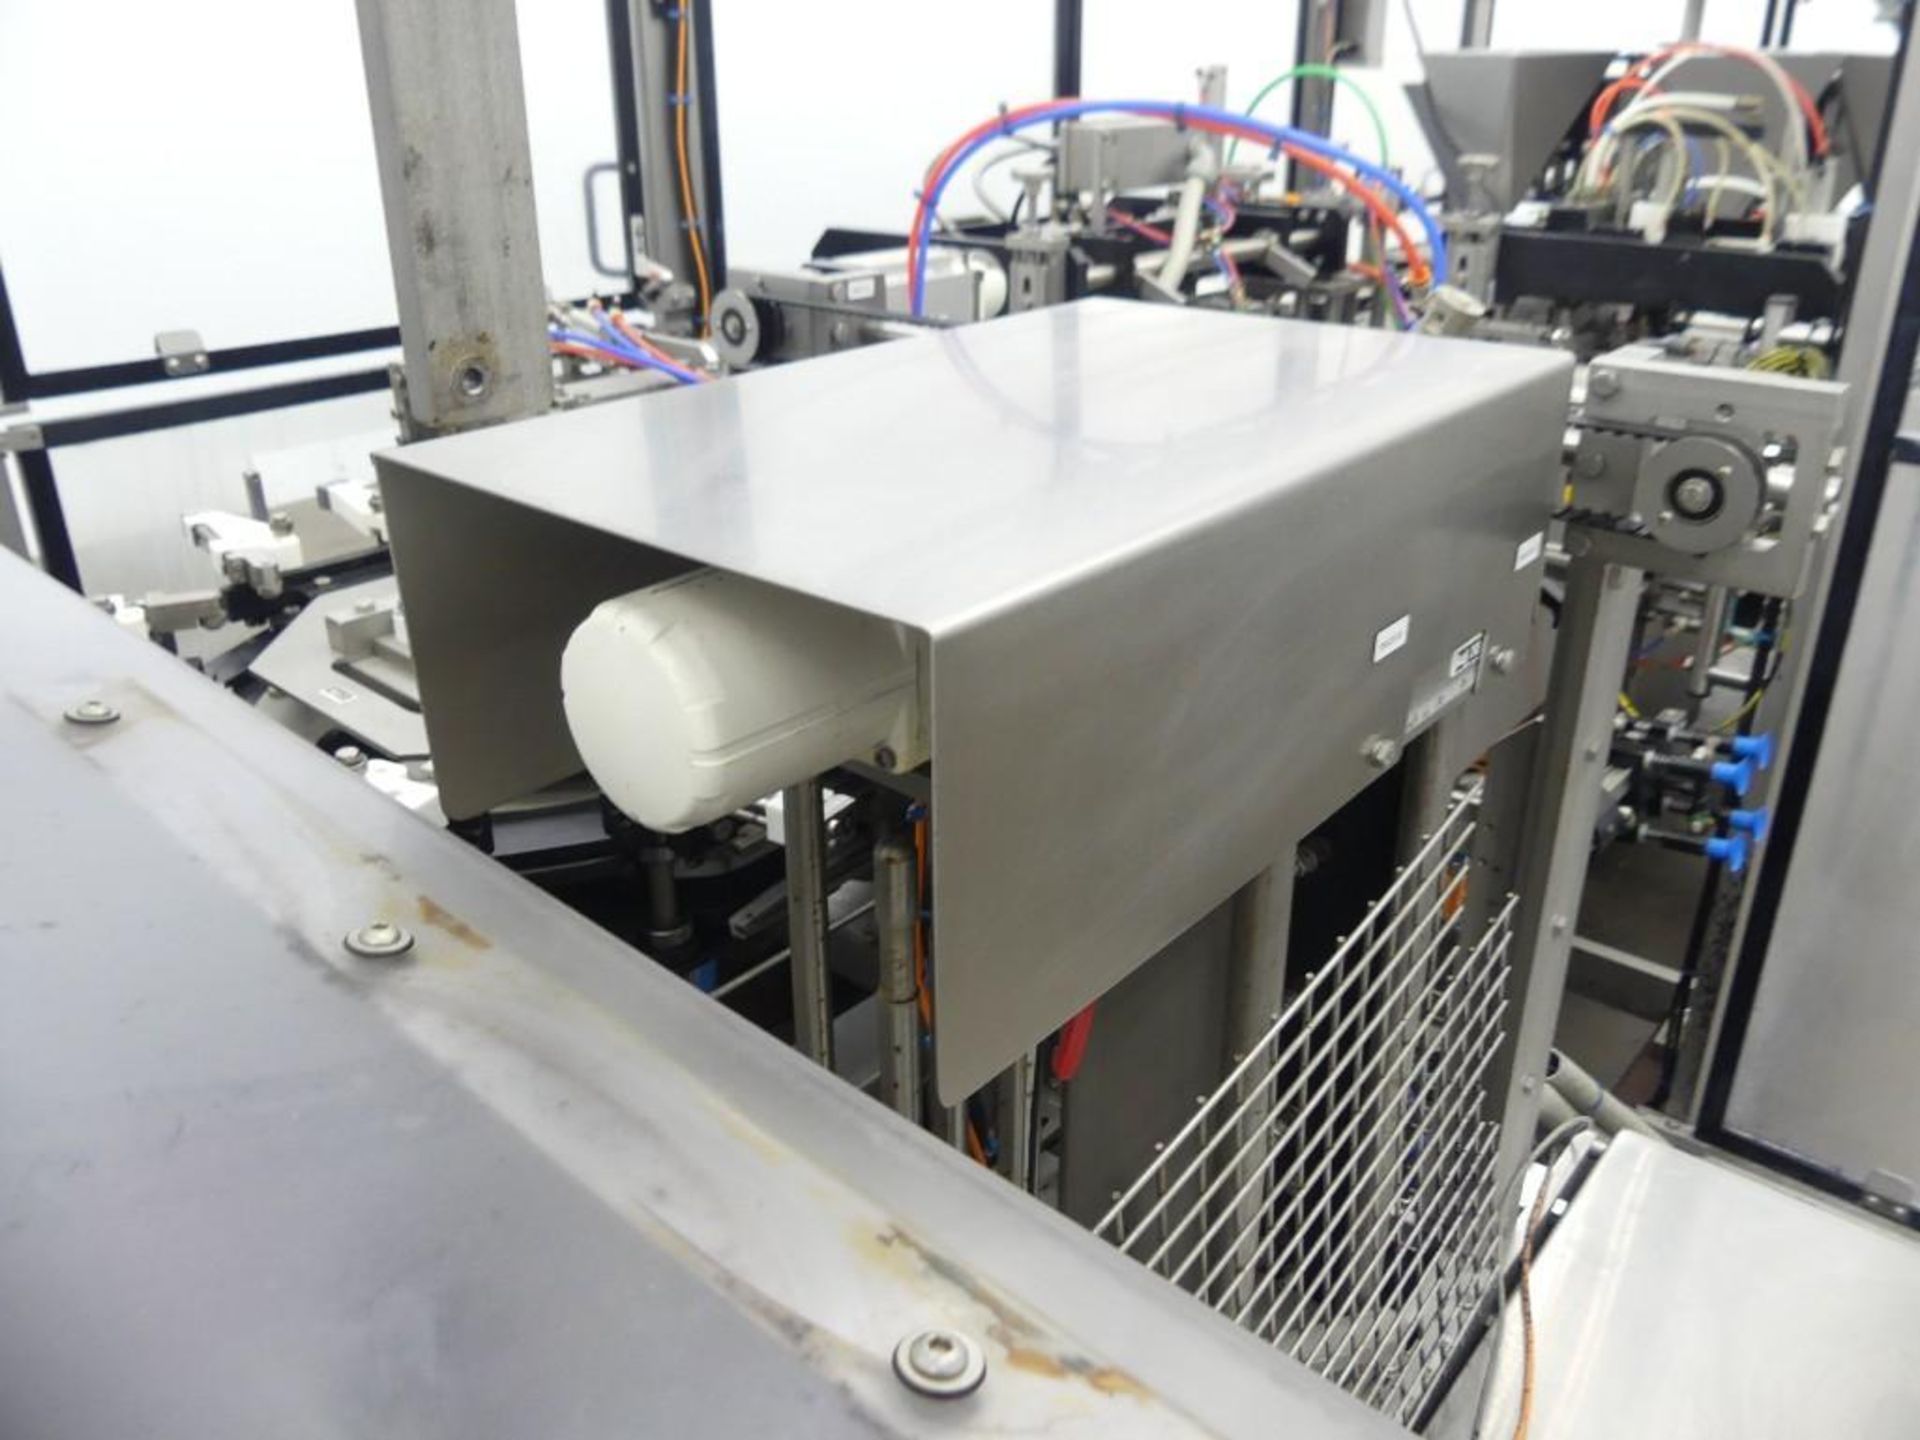 Massman HFFS-IM1000 Flexible Pouch Packaging System - Image 23 of 127